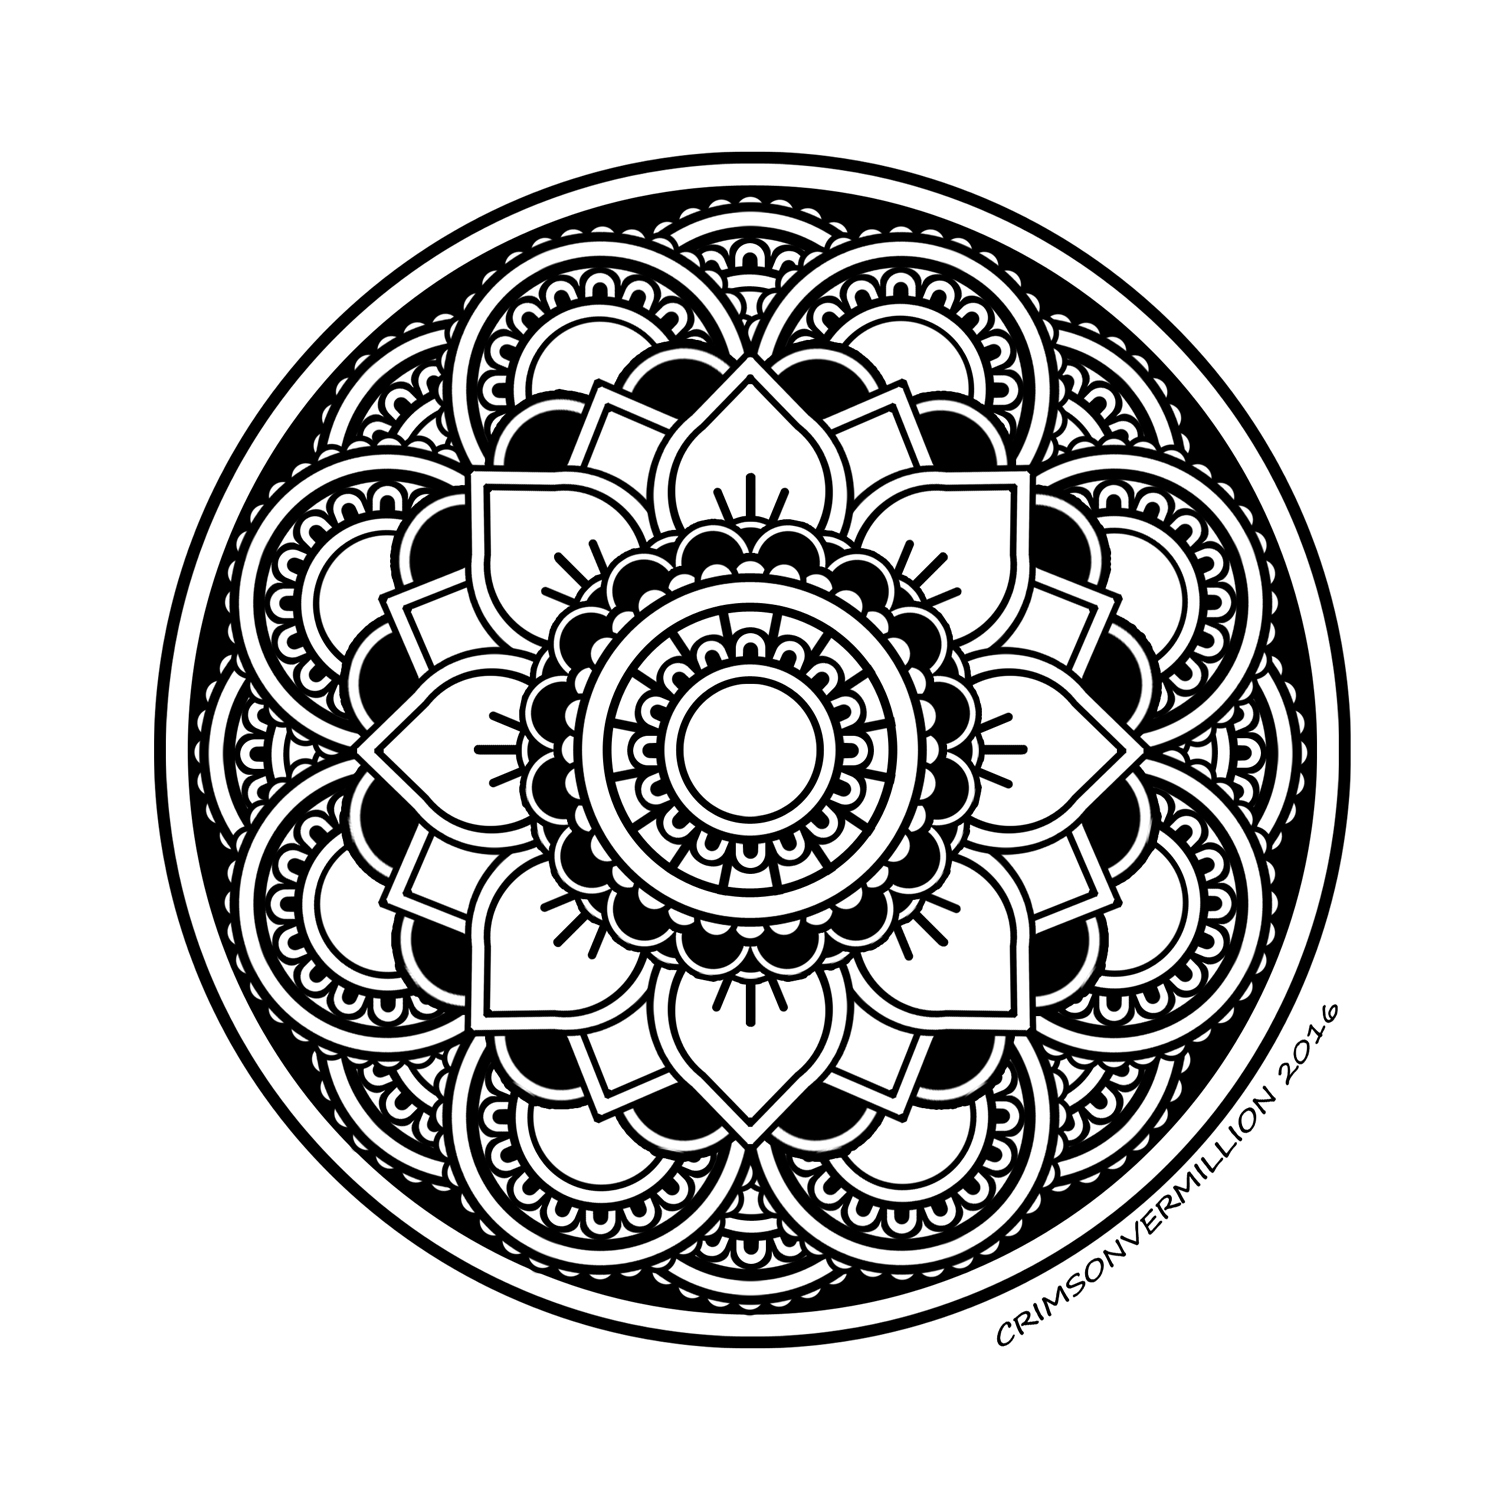 This mandala is a perfect representation of respect and unity!, Artist : Crimson Vermillion